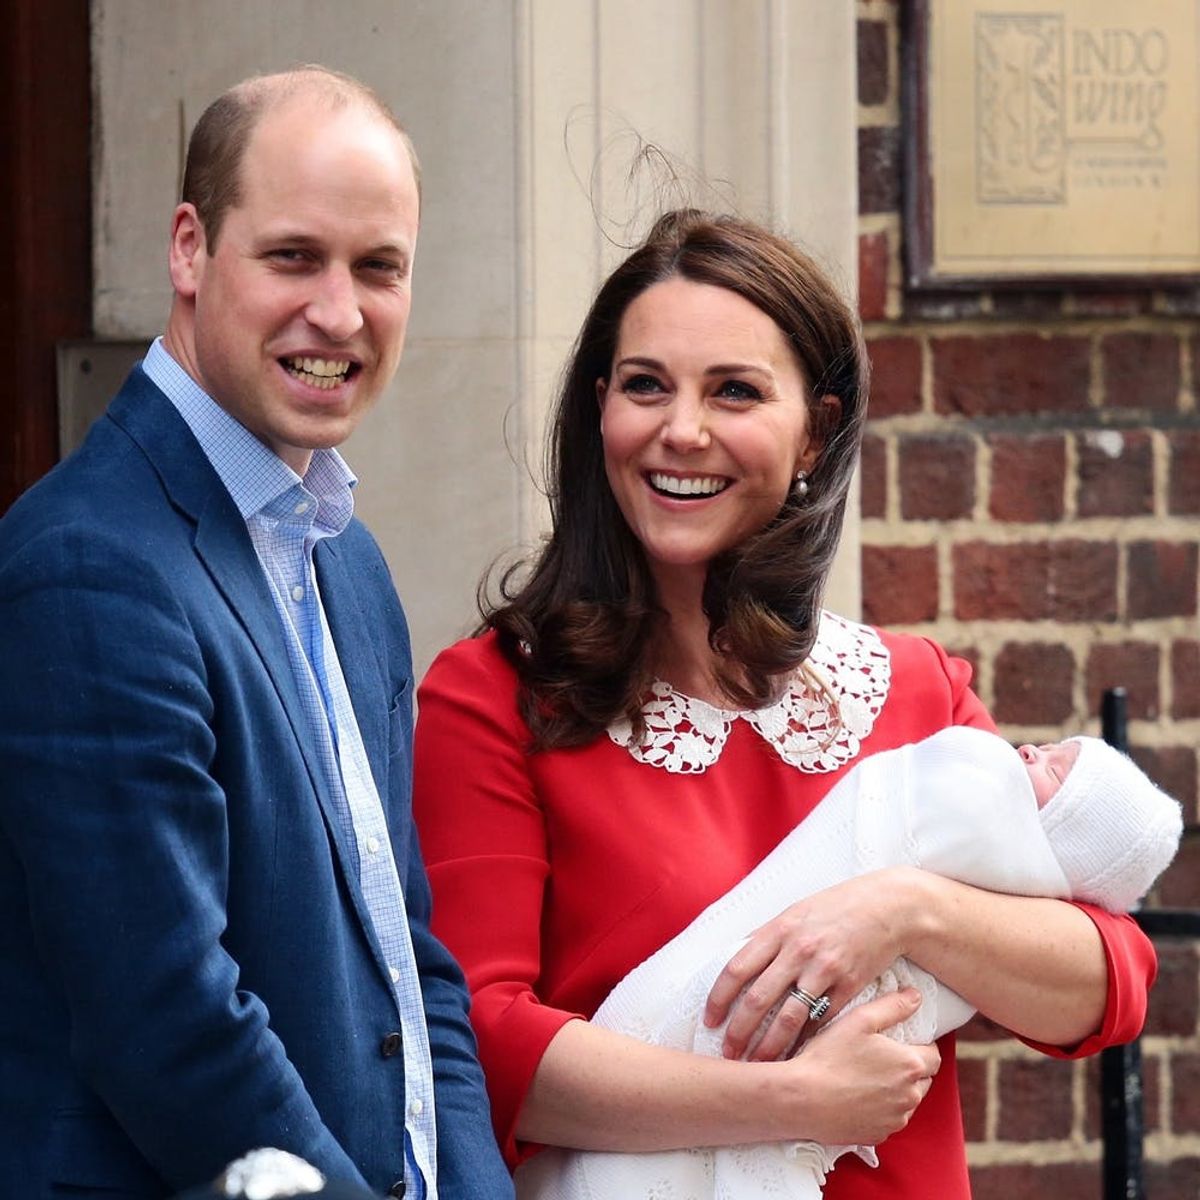 Prince William Opens Up About Life at Home With the New Baby